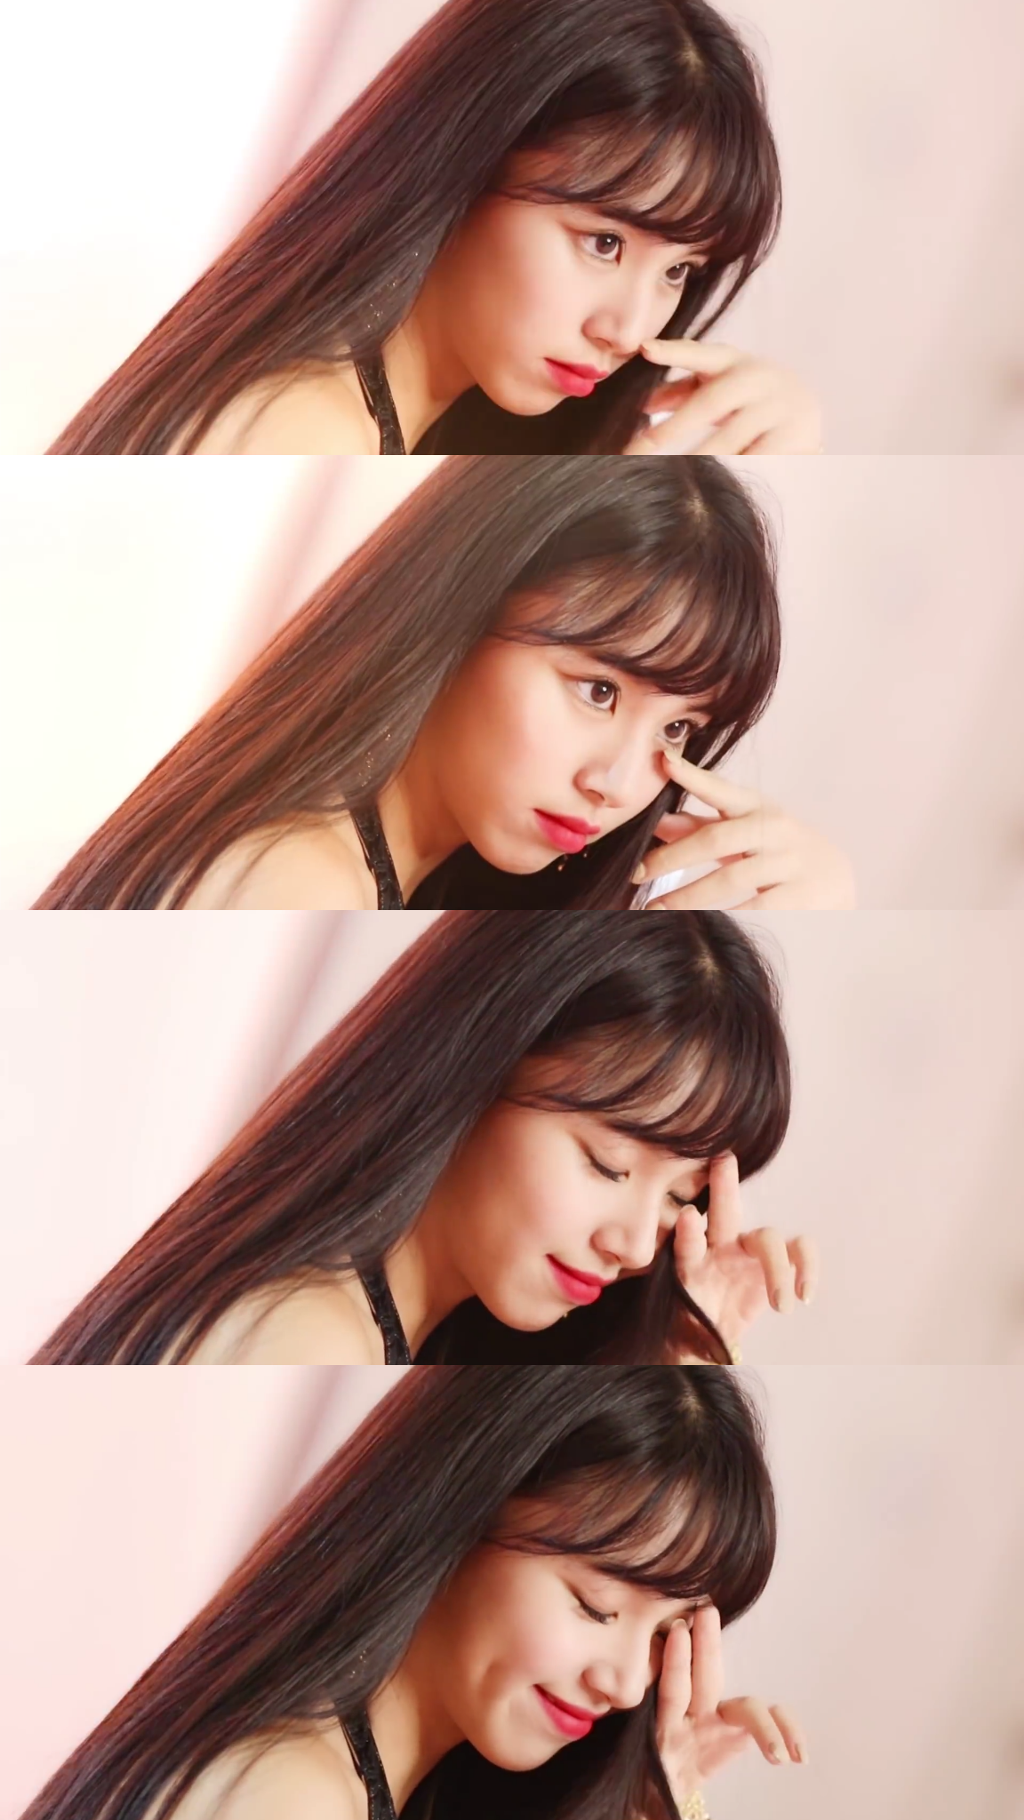 Son Chaeyoung Wallpaper